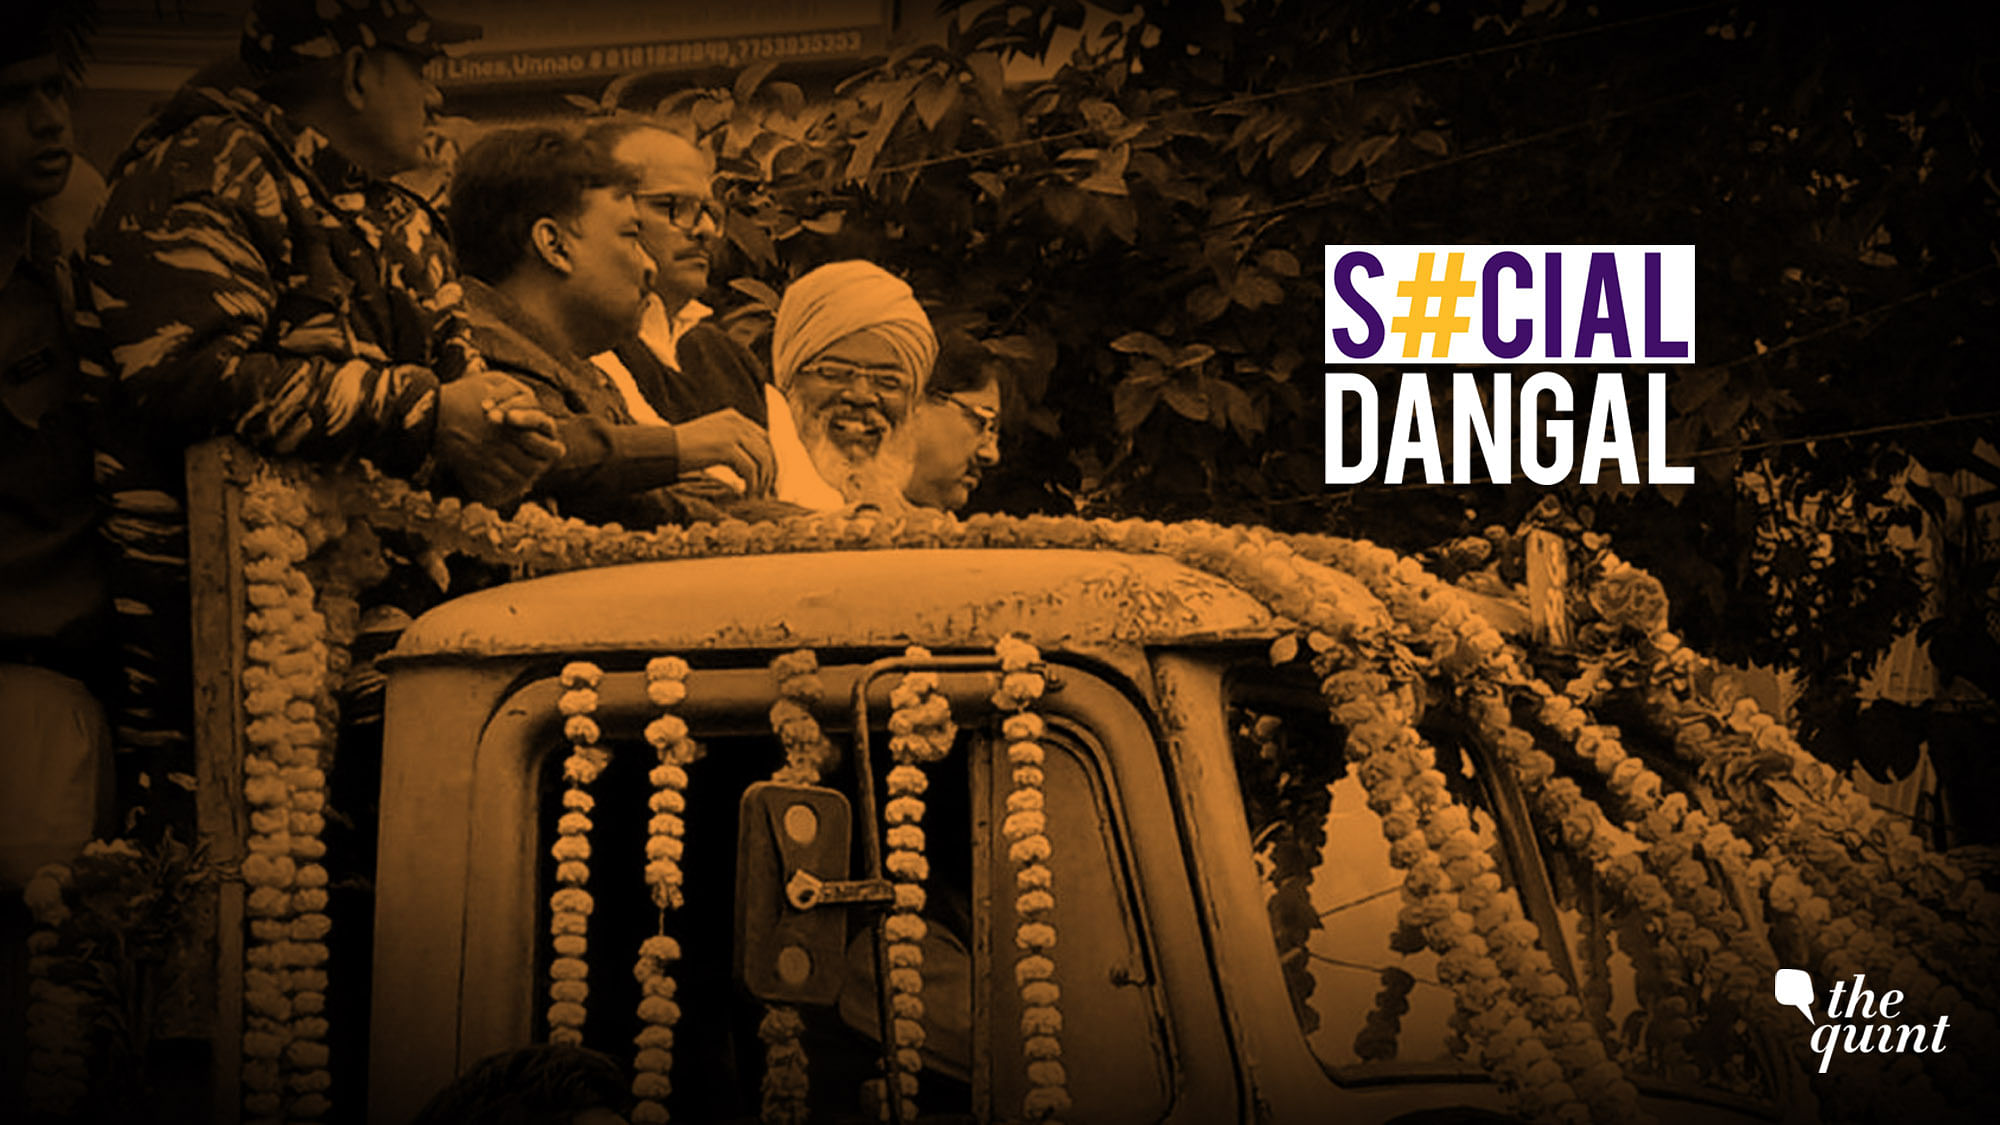 BJP MP Sakshi Maharaj was seen waving from the vehicle carrying mortal remains of a one of the soldiers killed in the attack.&nbsp;